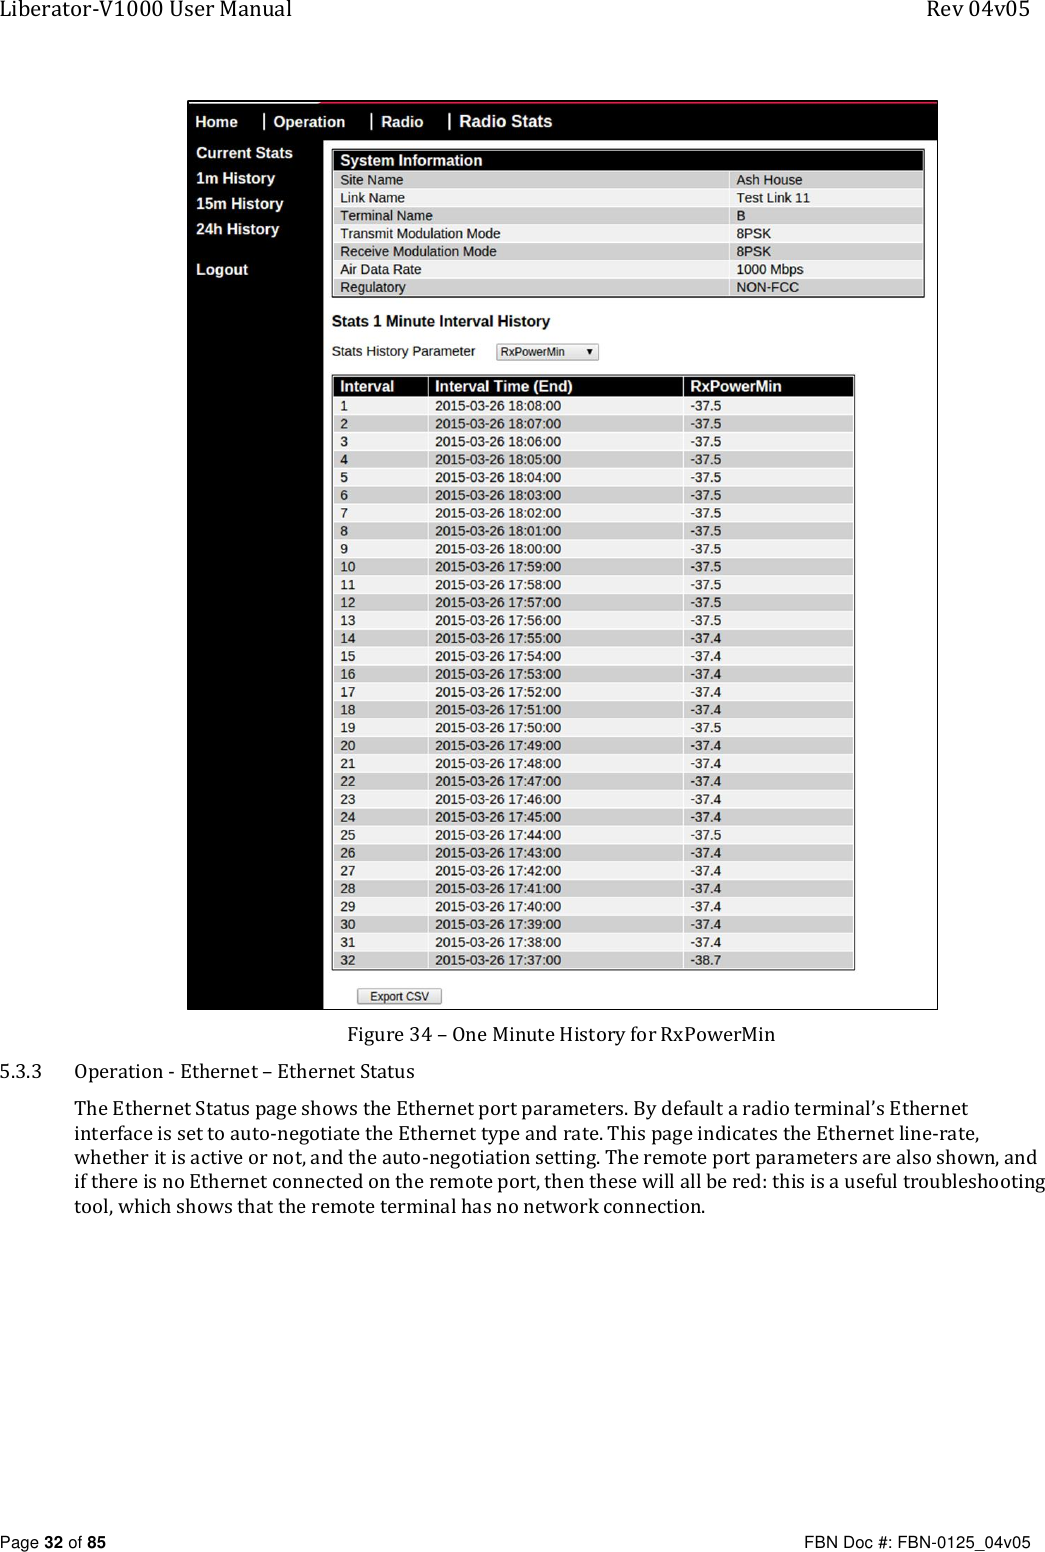 Liberator-V1000 User Manual  Rev 04v05     Page 32 of 85   FBN Doc #: FBN-0125_04v05  Figure 34 – One Minute History for RxPowerMin 5.3.3 Operation - Ethernet – Ethernet Status The Ethernet Status page shows the Ethernet port parameters. By default a radio terminal’s Ethernet interface is set to auto-negotiate the Ethernet type and rate. This page indicates the Ethernet line-rate, whether it is active or not, and the auto-negotiation setting. The remote port parameters are also shown, and if there is no Ethernet connected on the remote port, then these will all be red: this is a useful troubleshooting tool, which shows that the remote terminal has no network connection.  